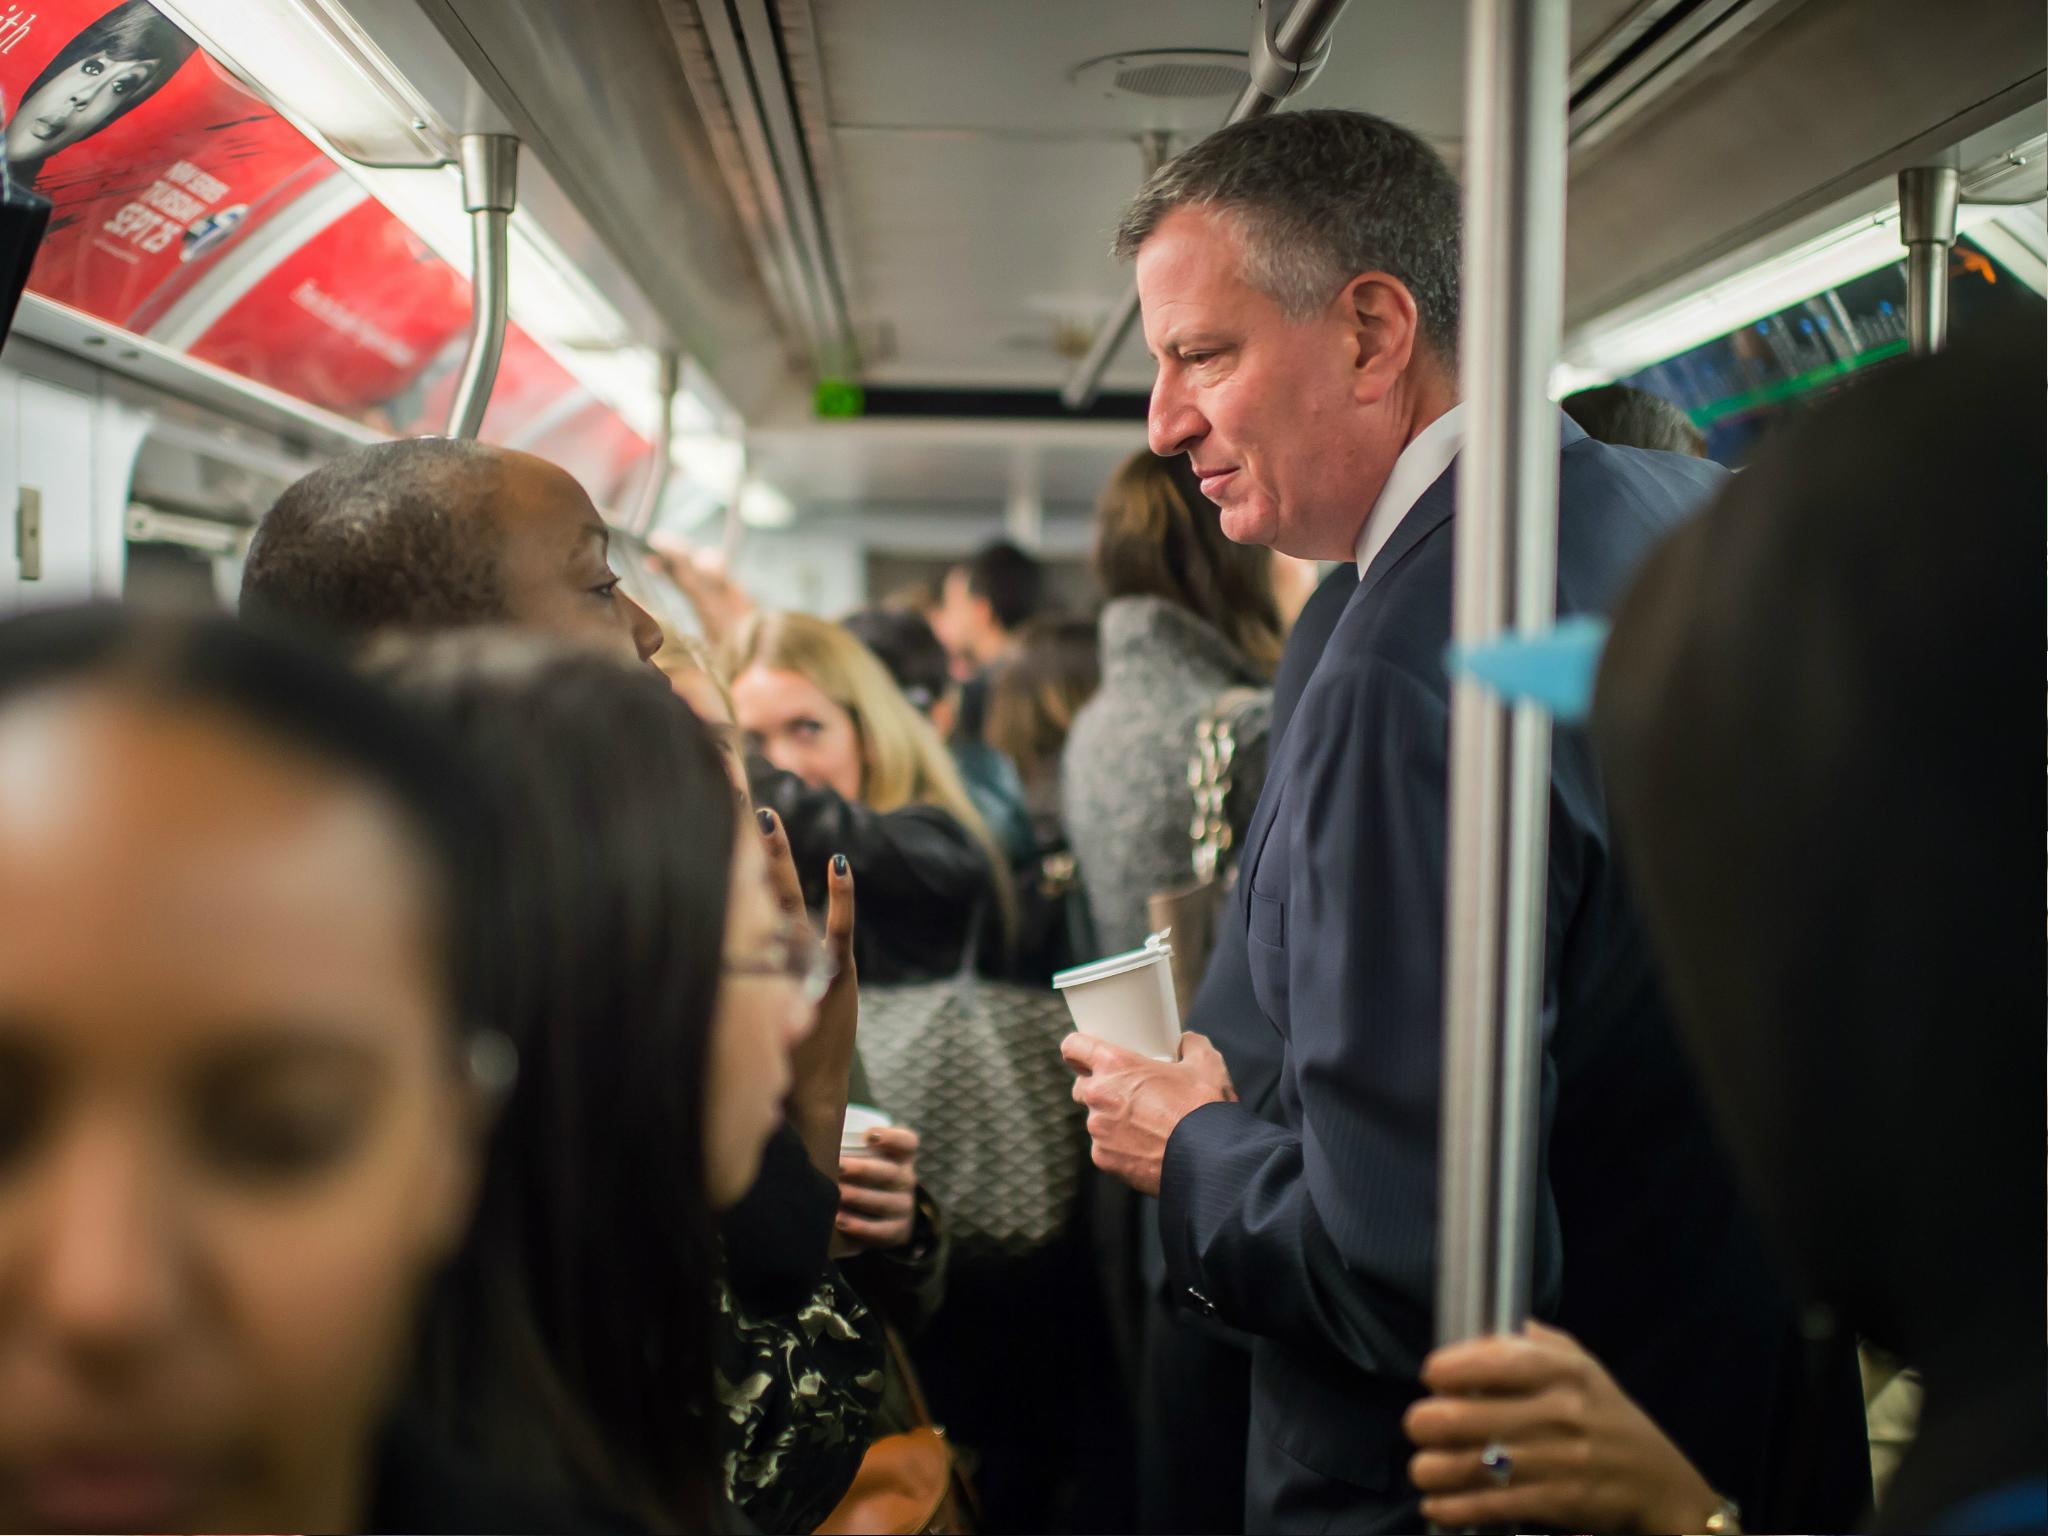 In this image handout provided by the Office of Mayor of New York, Mayor Bill de Blasio takes the subway on his route to City Hall, on 24 October 2014 in New York Cit